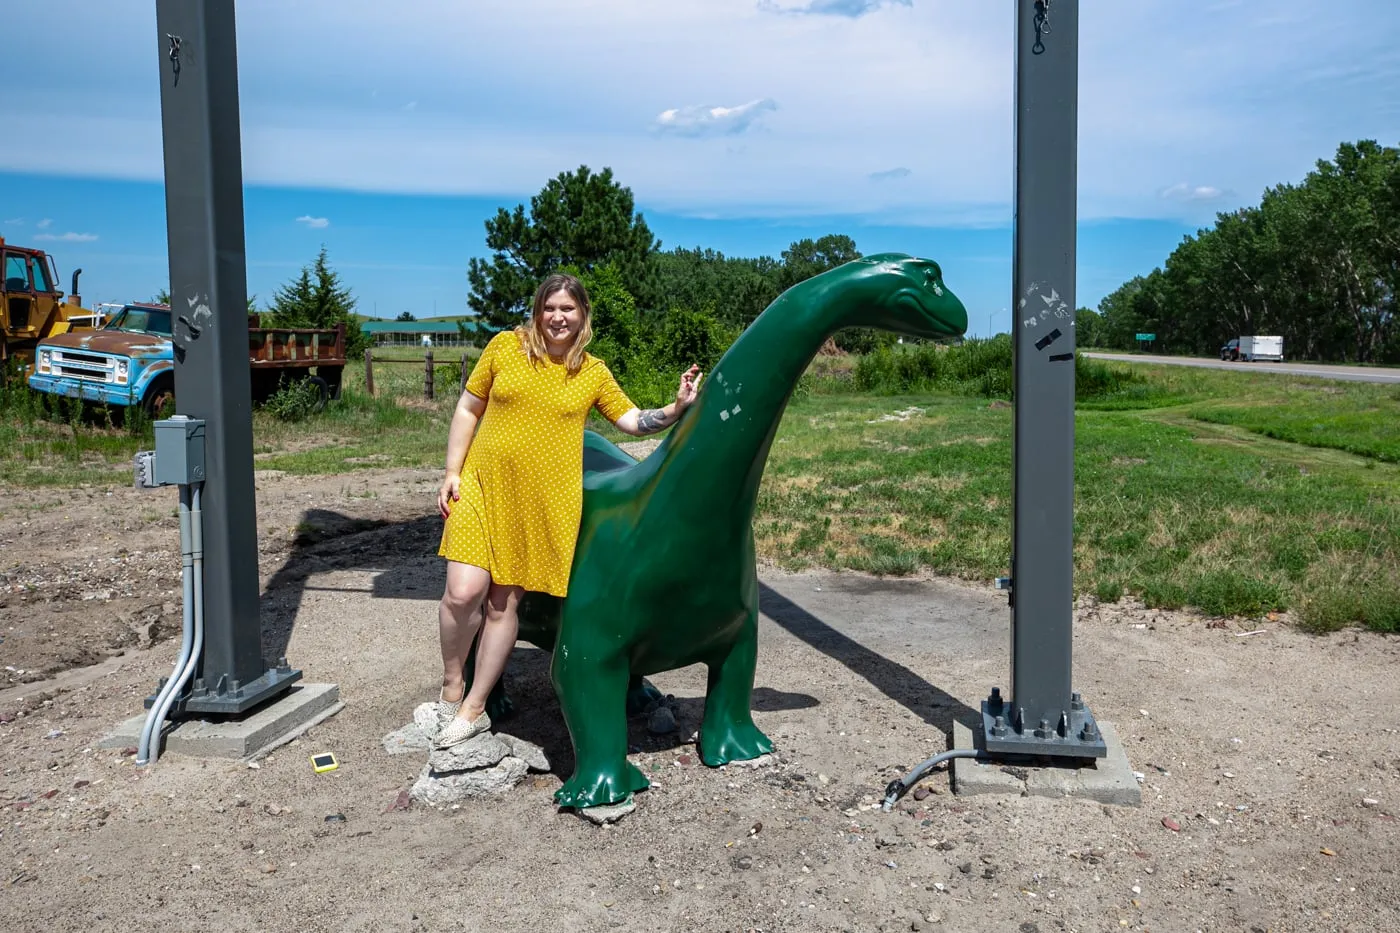 Sinclair Dinosaur in Thedford, Nebraska at a Sinclair Gas Station on the Sandhills Journey Scenic Byway | Nebraska Roadside Attractions